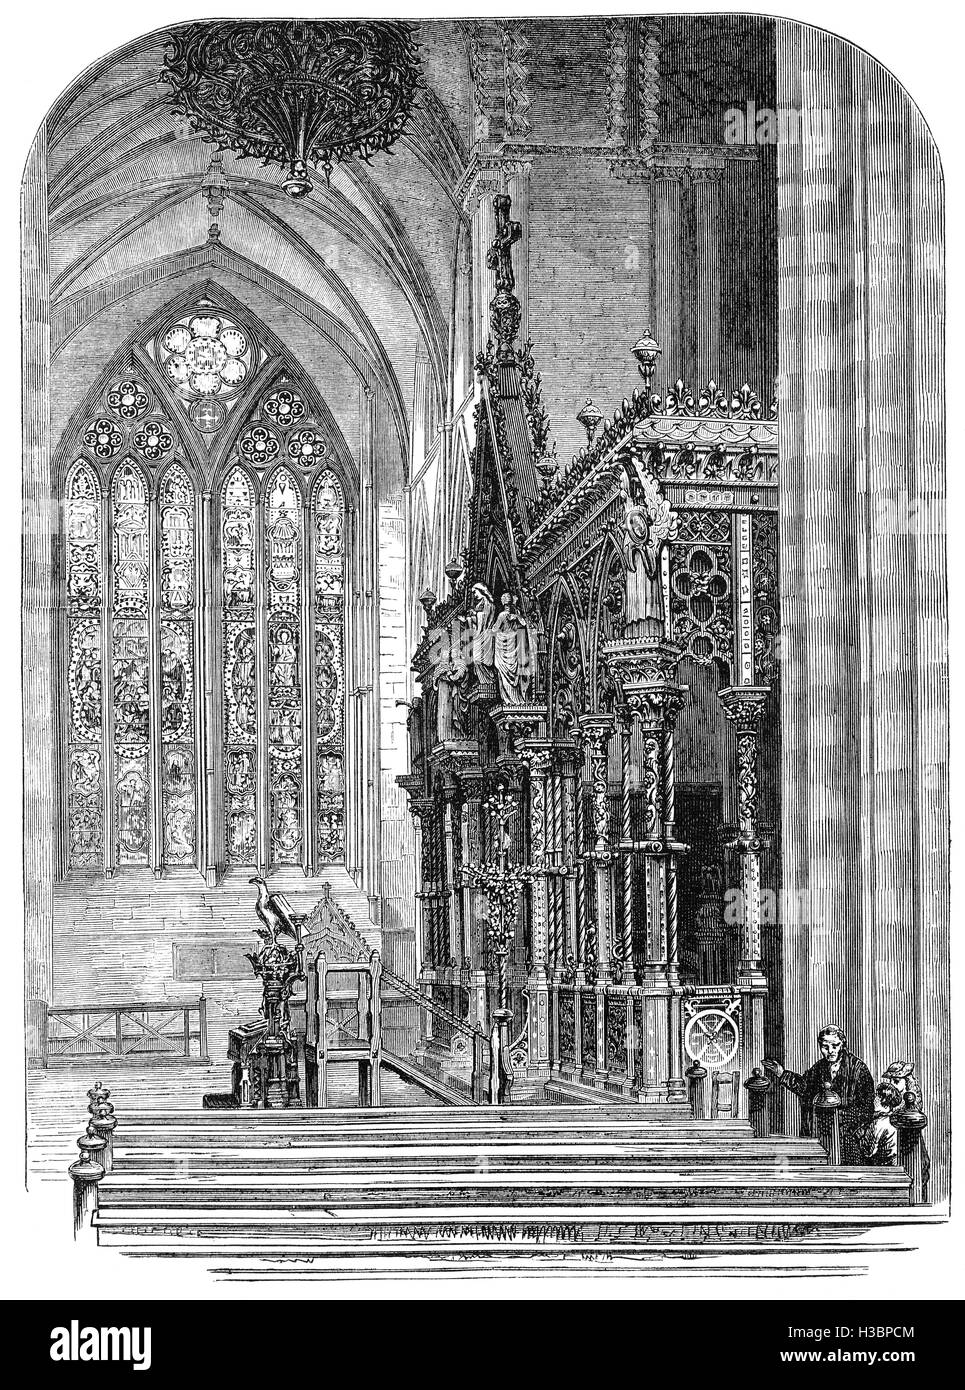 The north transept and screen, after 19th Century restoration work in Hereford Cathedral, located at Hereford in England, dates from 1079. Stock Photo